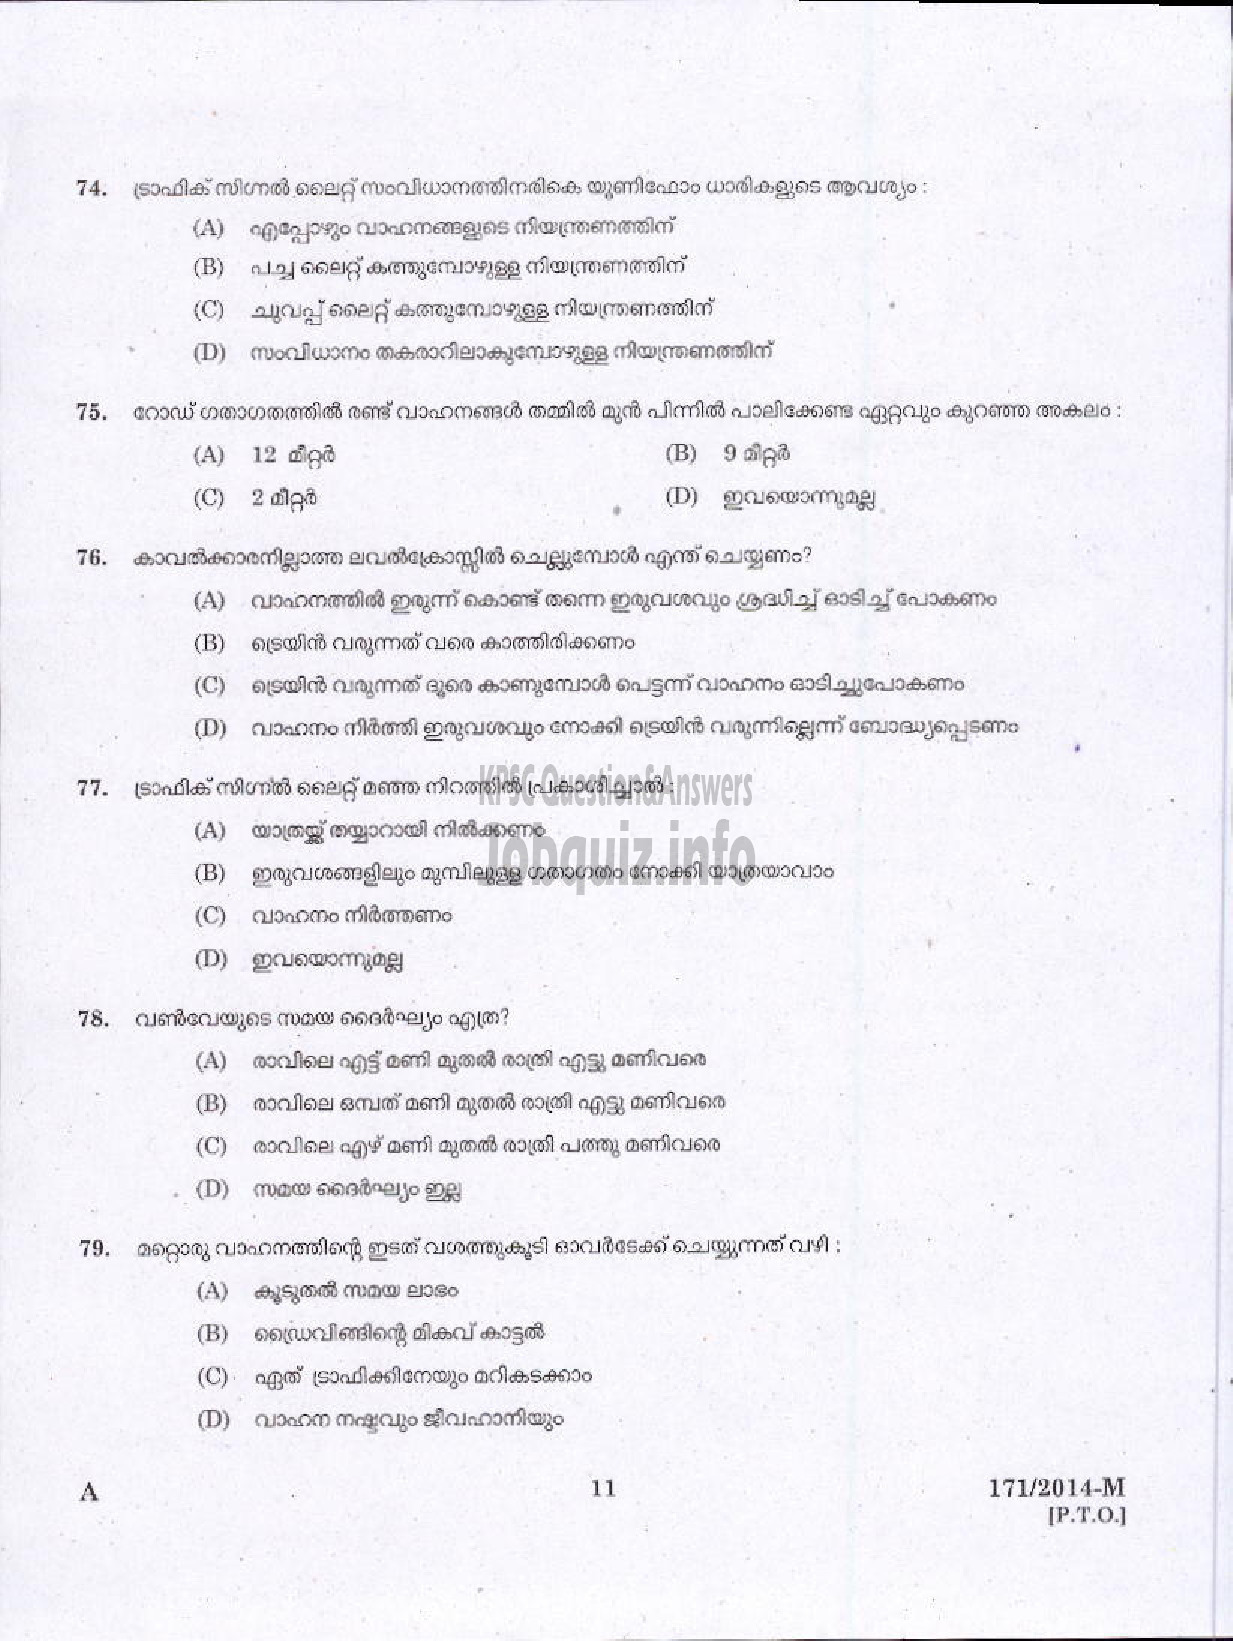 Kerala PSC Question Paper - DRIVER GR II KERALA ELECTRICAL AND ALLIED ENGINEERING COMPANY LTD ( Malayalam ) -9